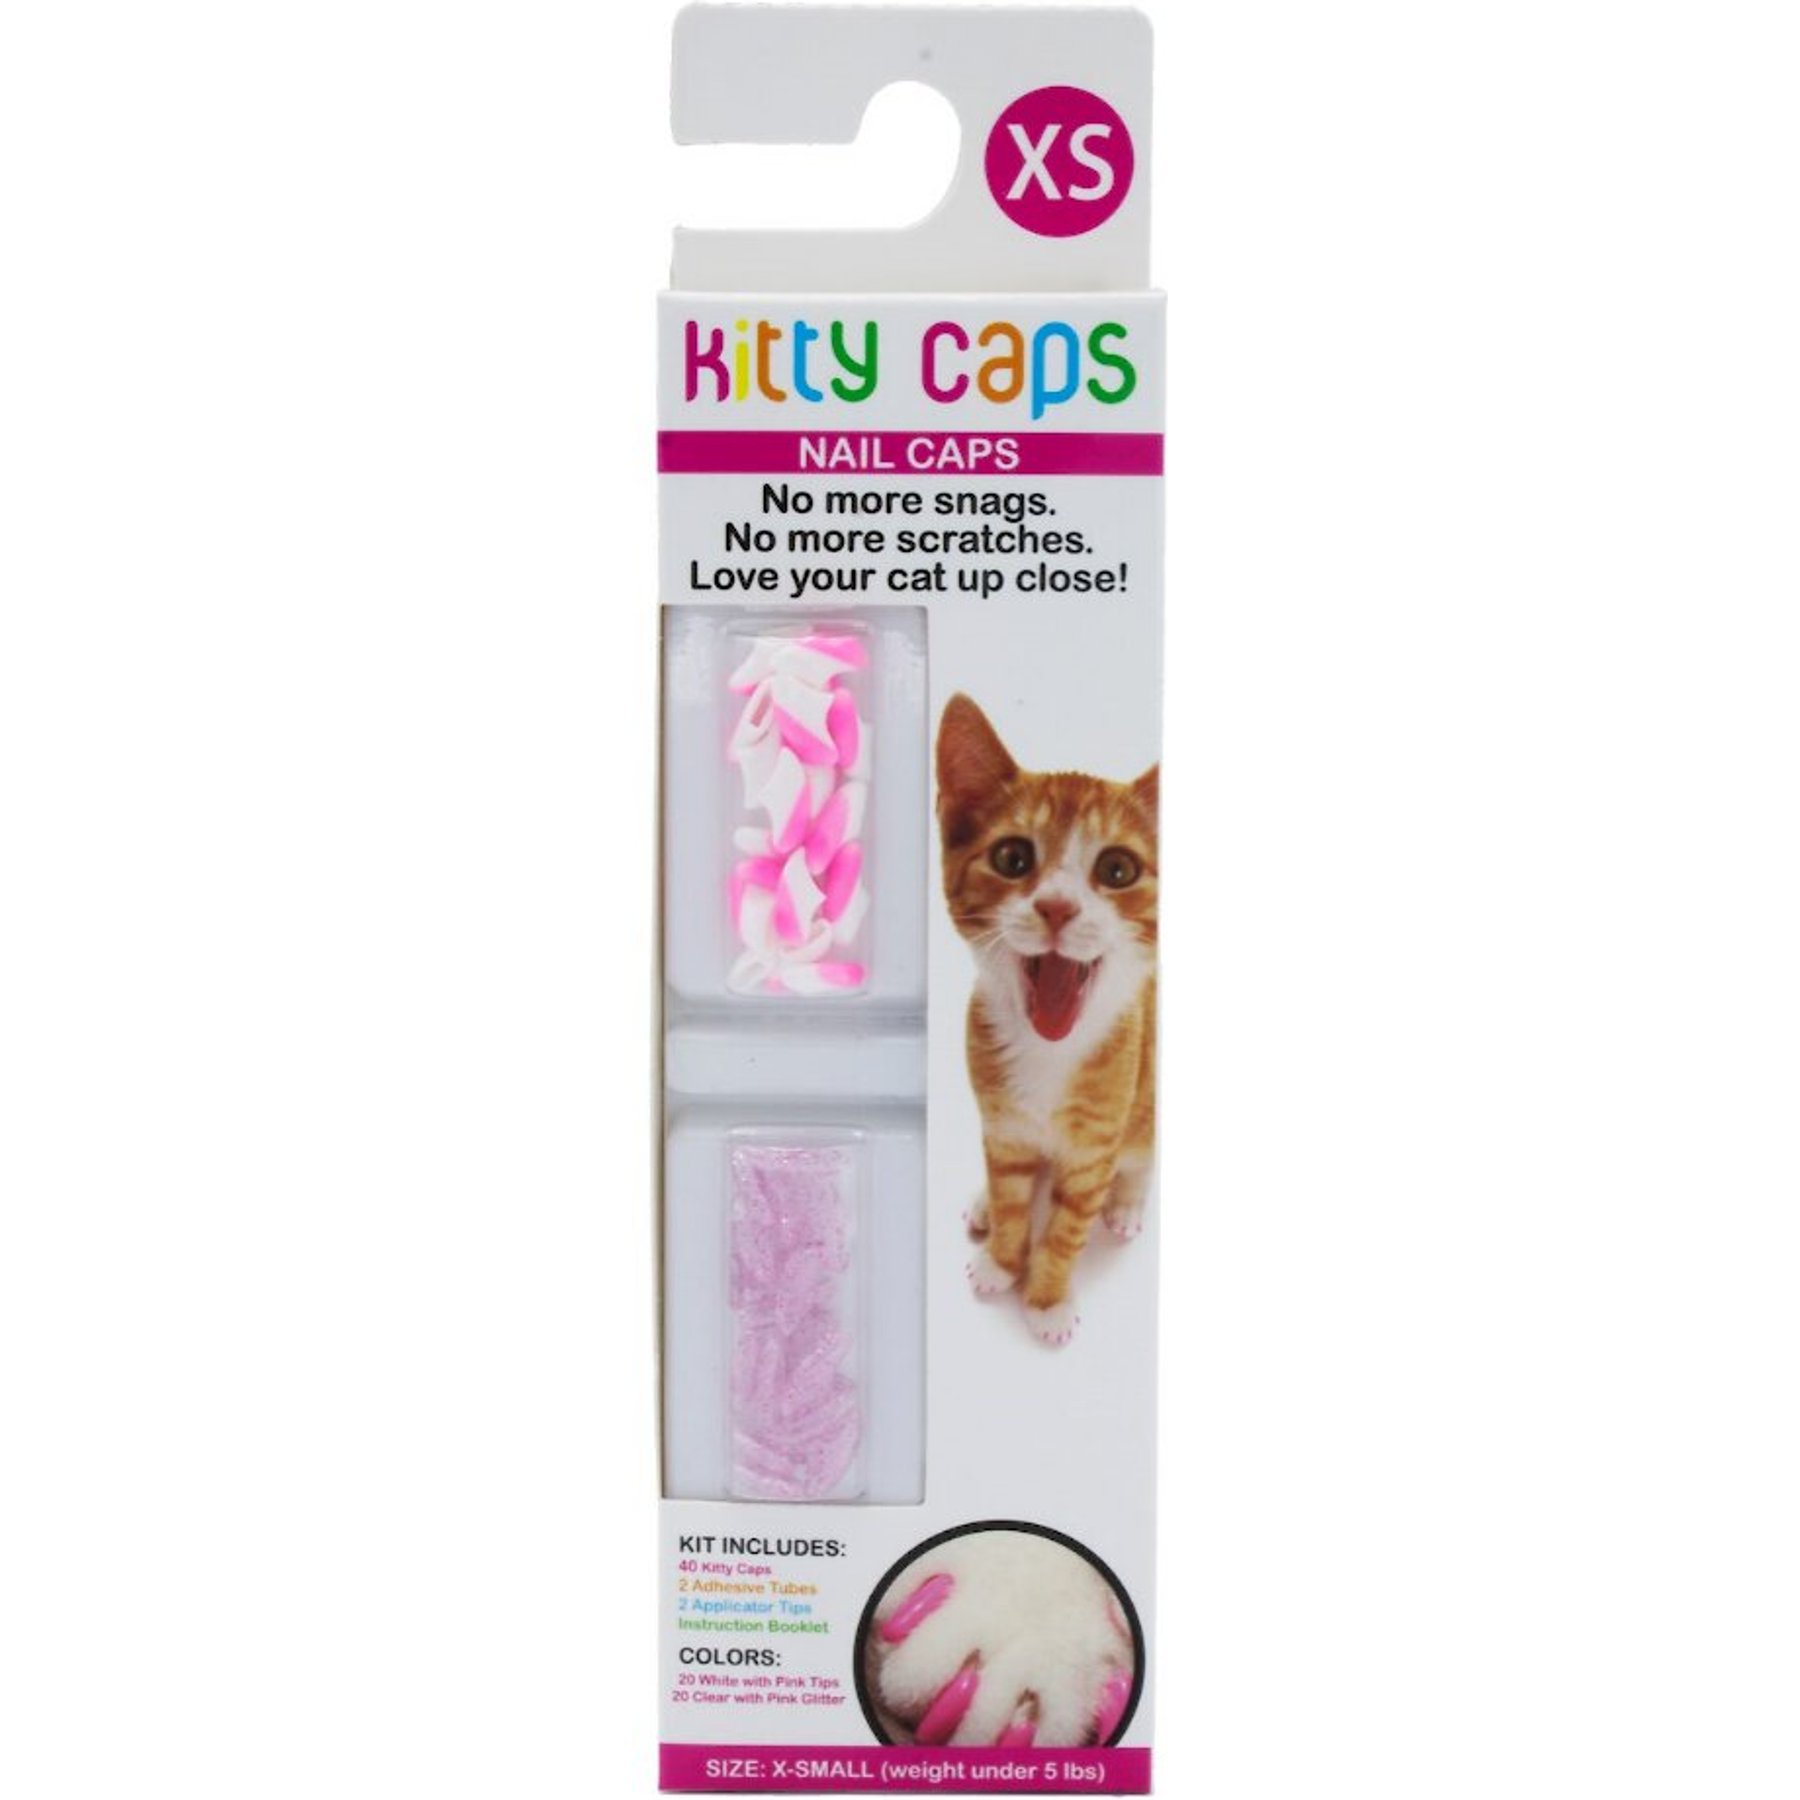 Soft Nail Caps for Cats Closeout Sales | Purrdy Paws